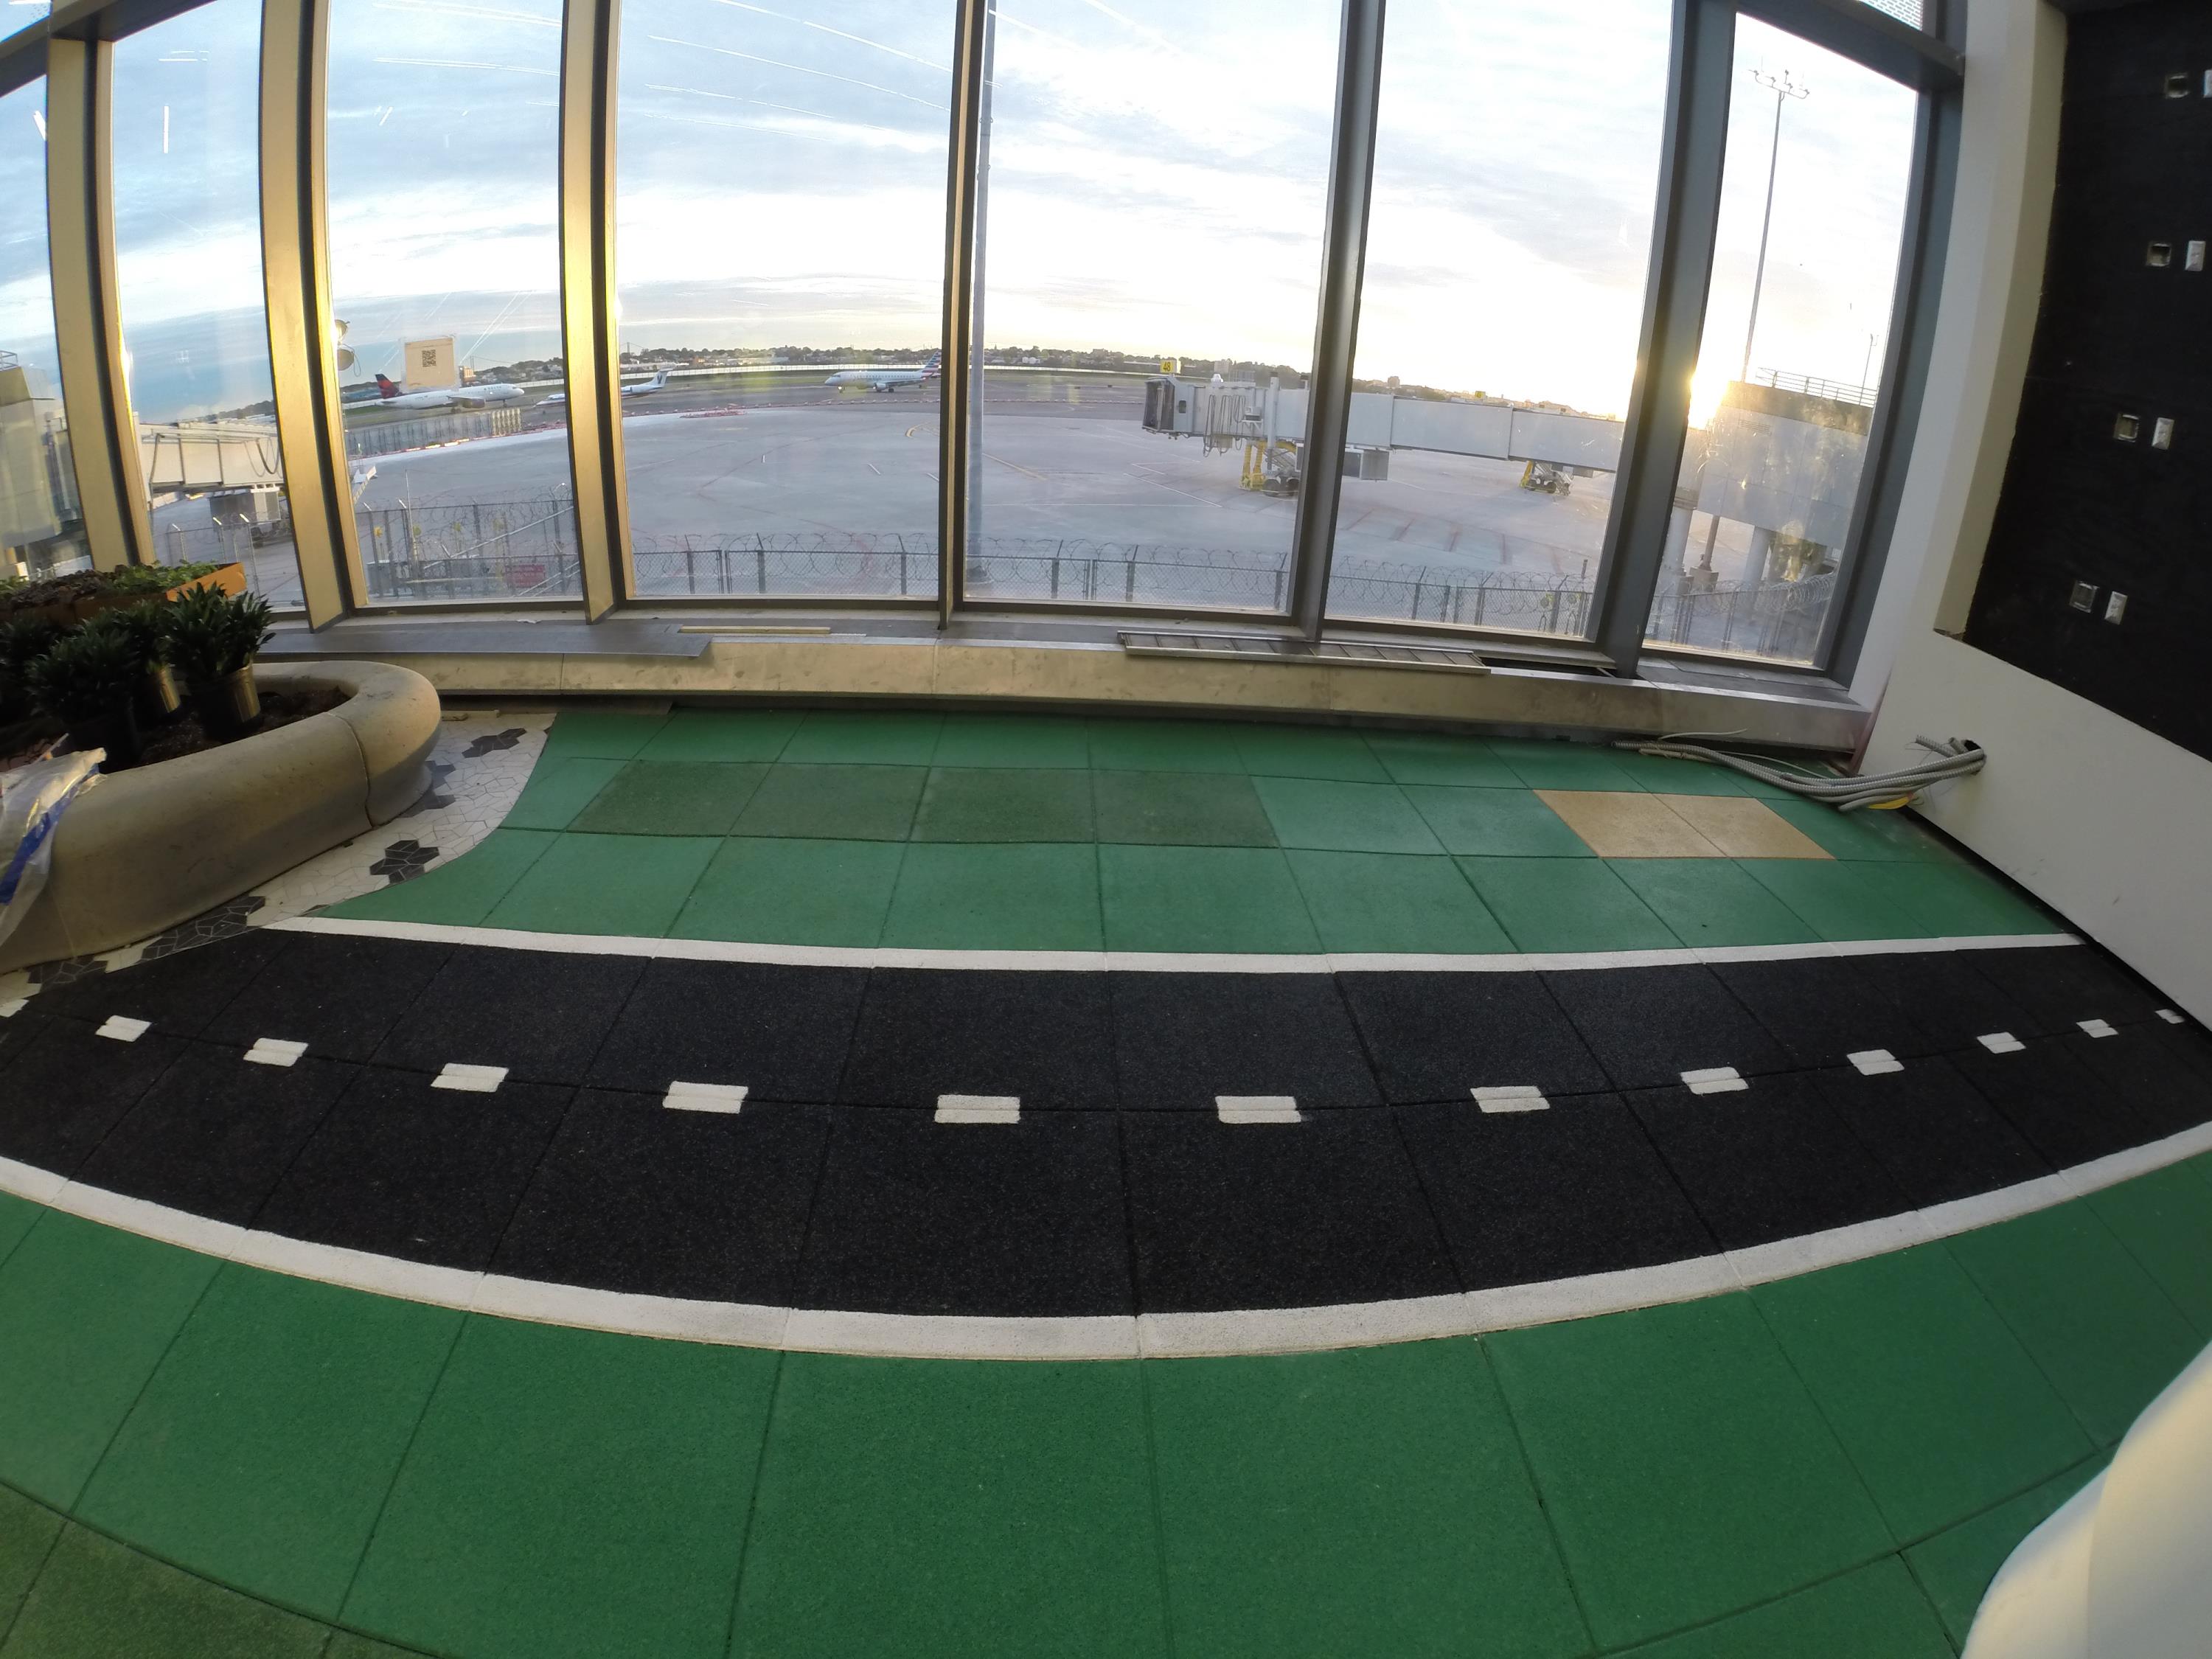 Indoor Acoustical Flooring Installed at NYC Airport